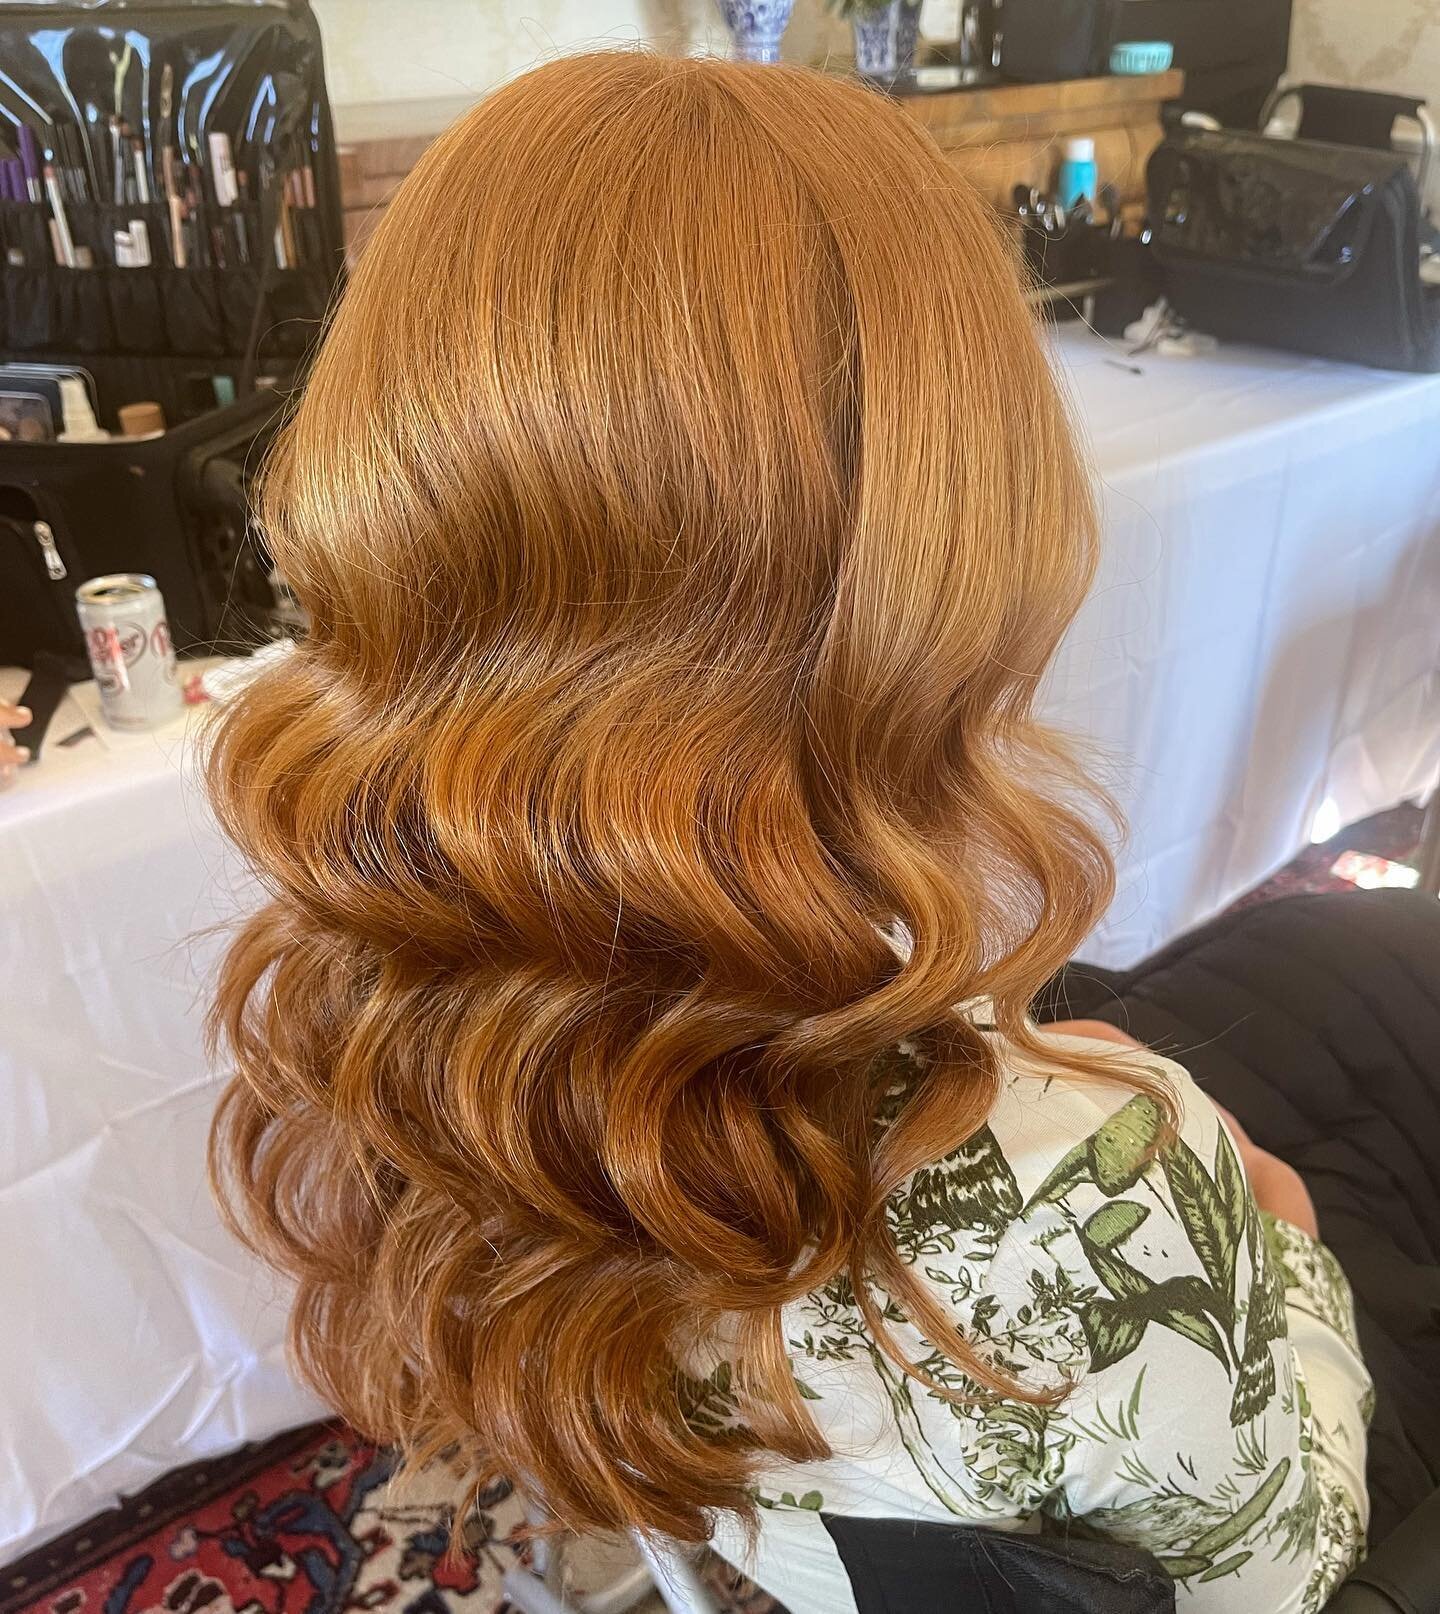 We love a good glam wave. Depending on the length and amount of hair, this style will take a minimum of one hour. We 100% recommend extensions for our brides! @beautyasylum #beautyasylum @cosmobyannie #beautyasylum_annie
.
.
.
#glamwaves #redhair #br